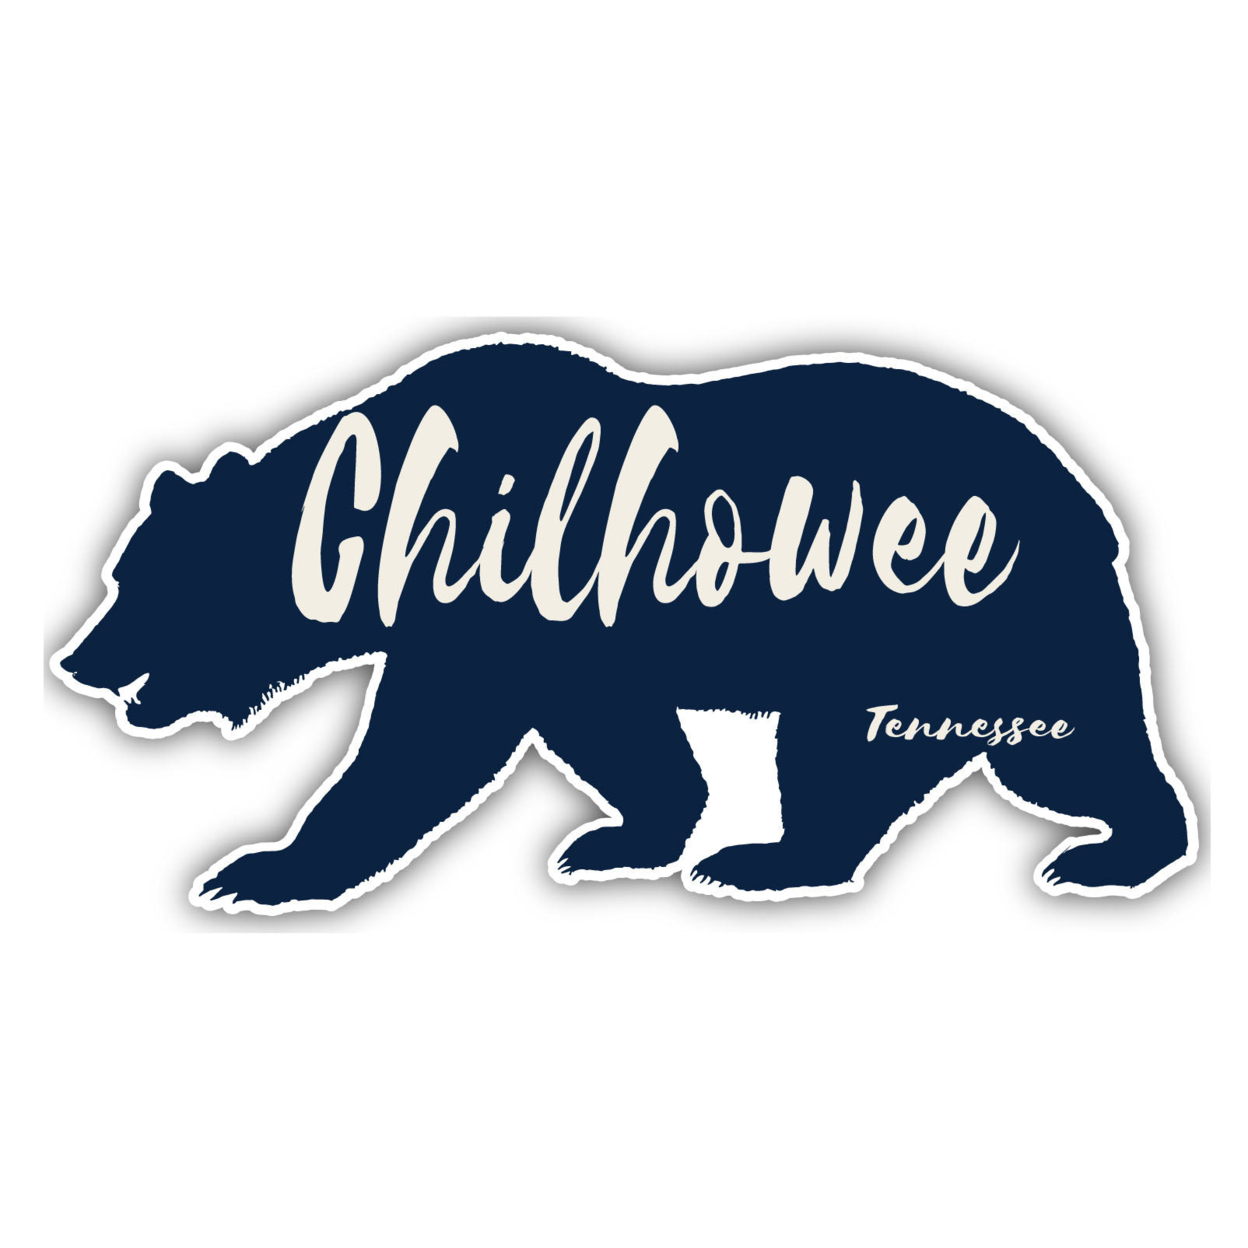 Chilhowee Tennessee Souvenir Decorative Stickers (Choose Theme And Size) - 4-Pack, 6-Inch, Bear